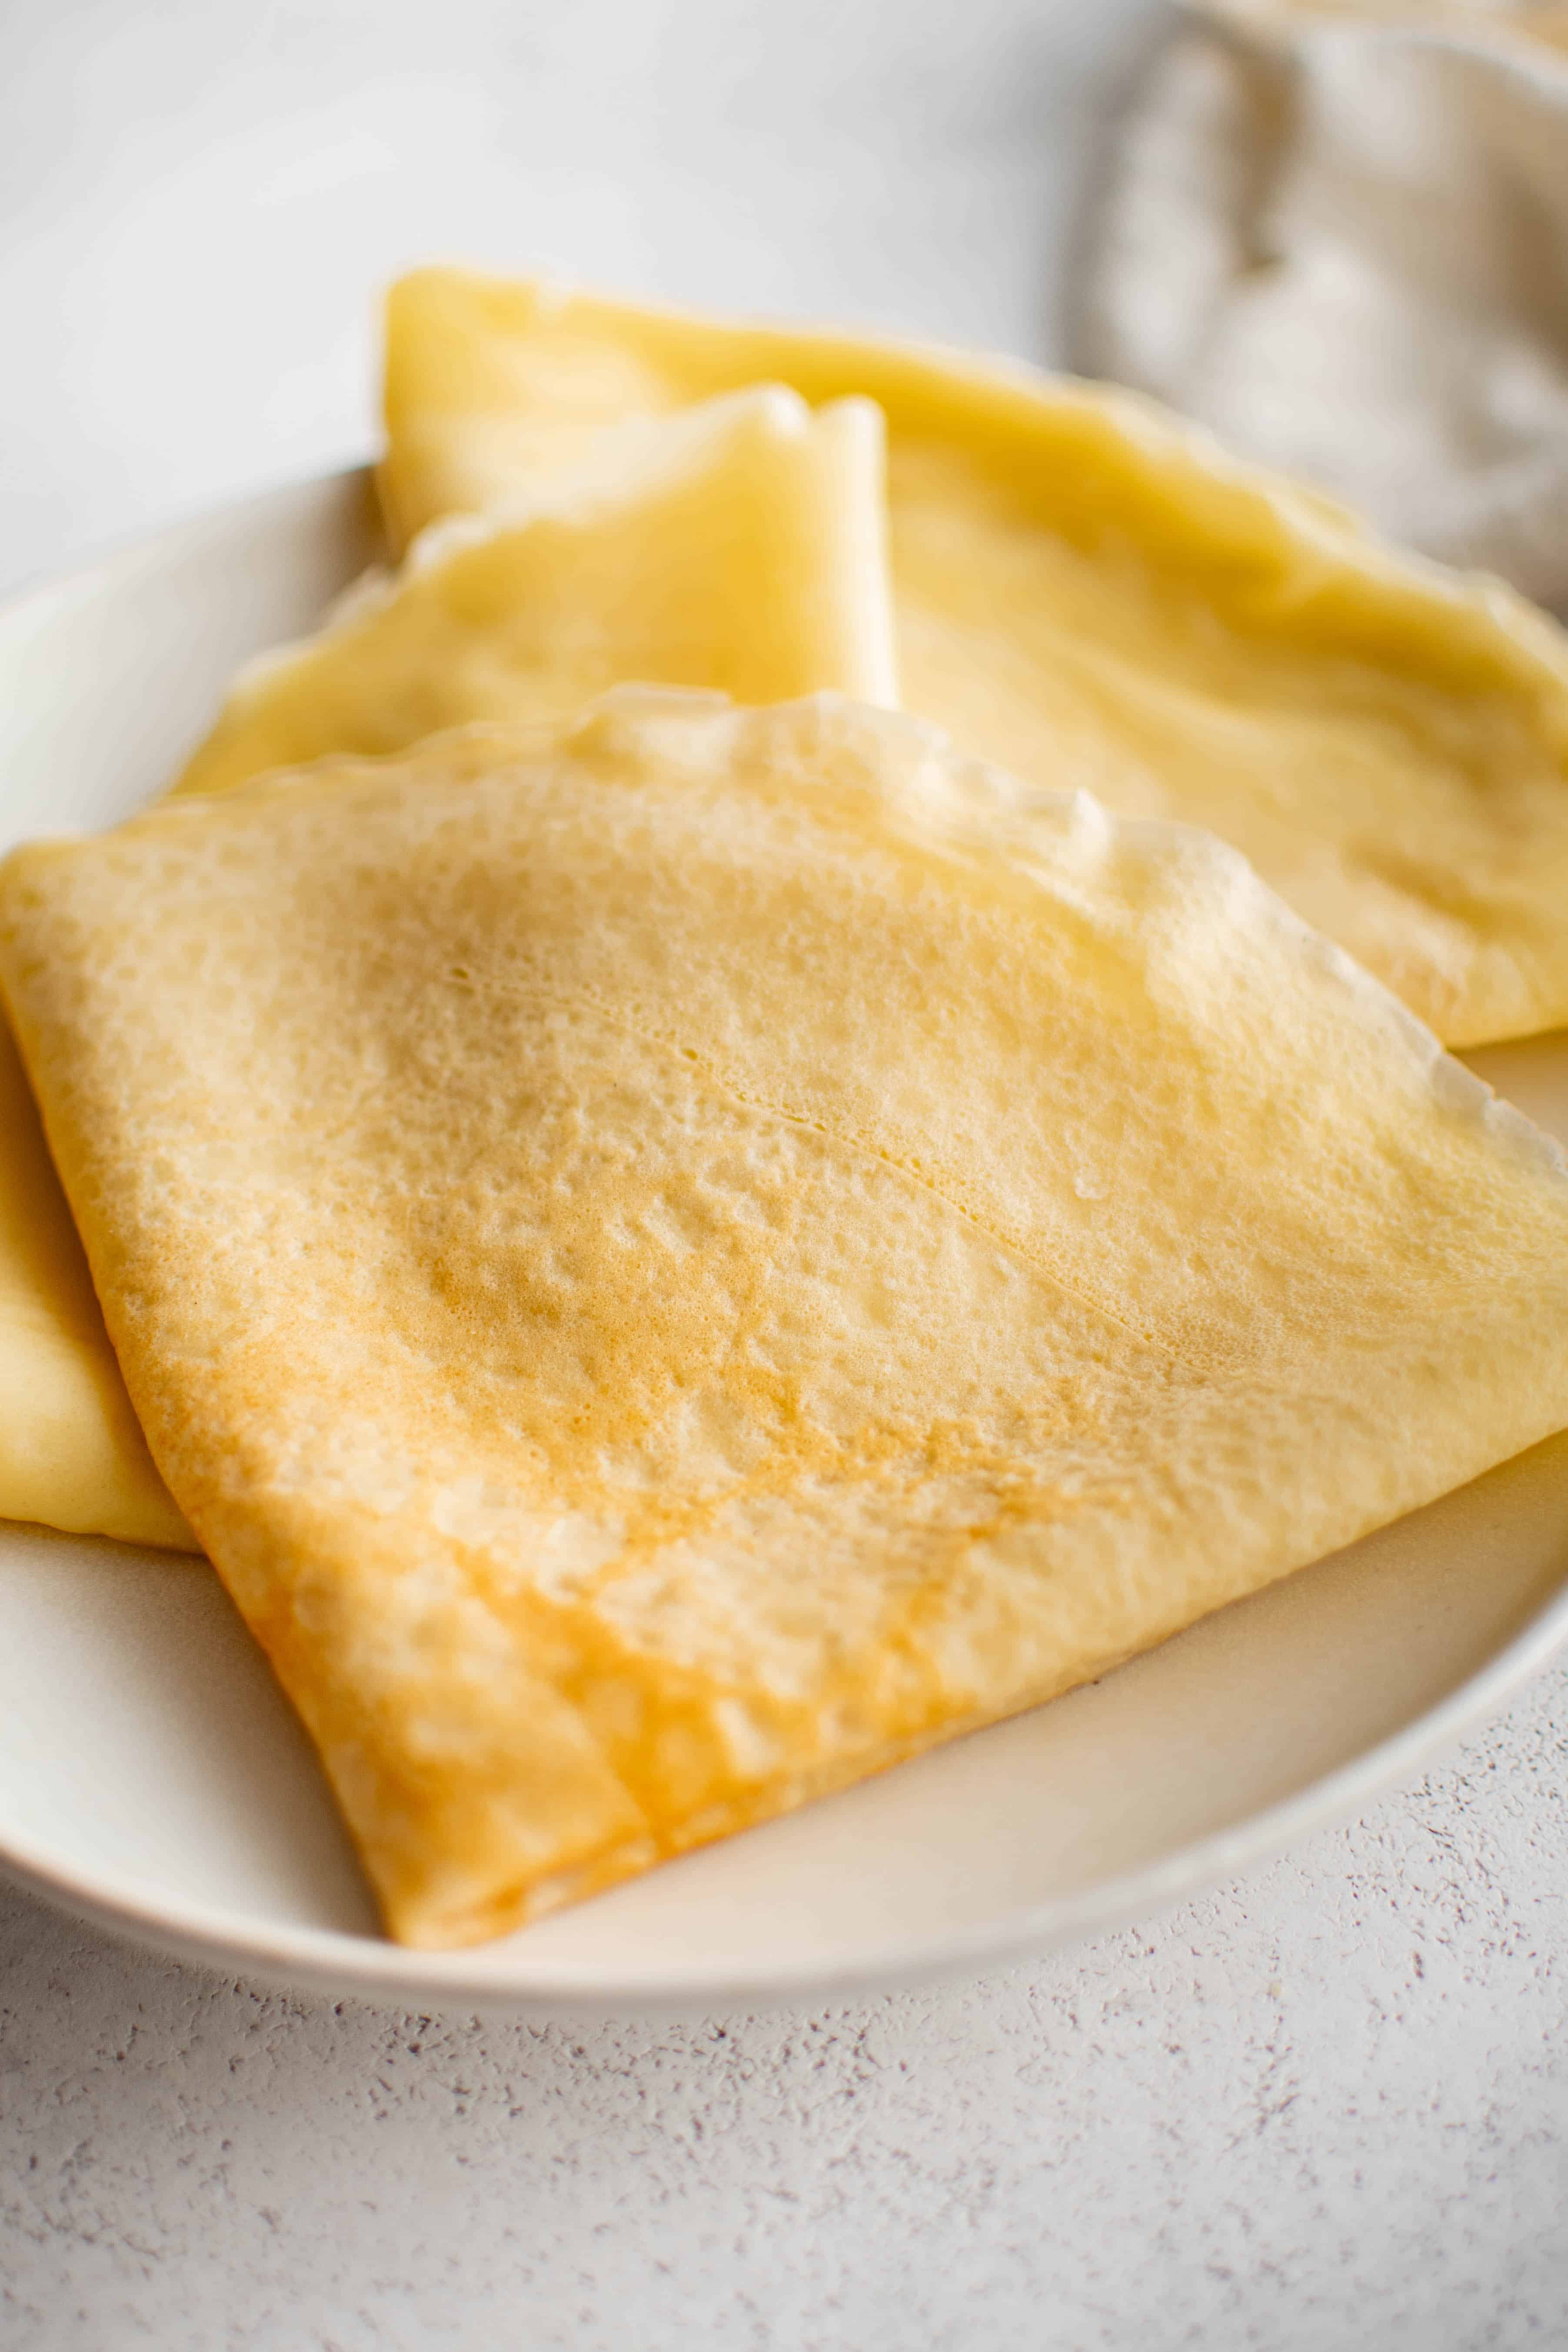 Three golden crepes with crisp edges folded into quarters on a white plate.